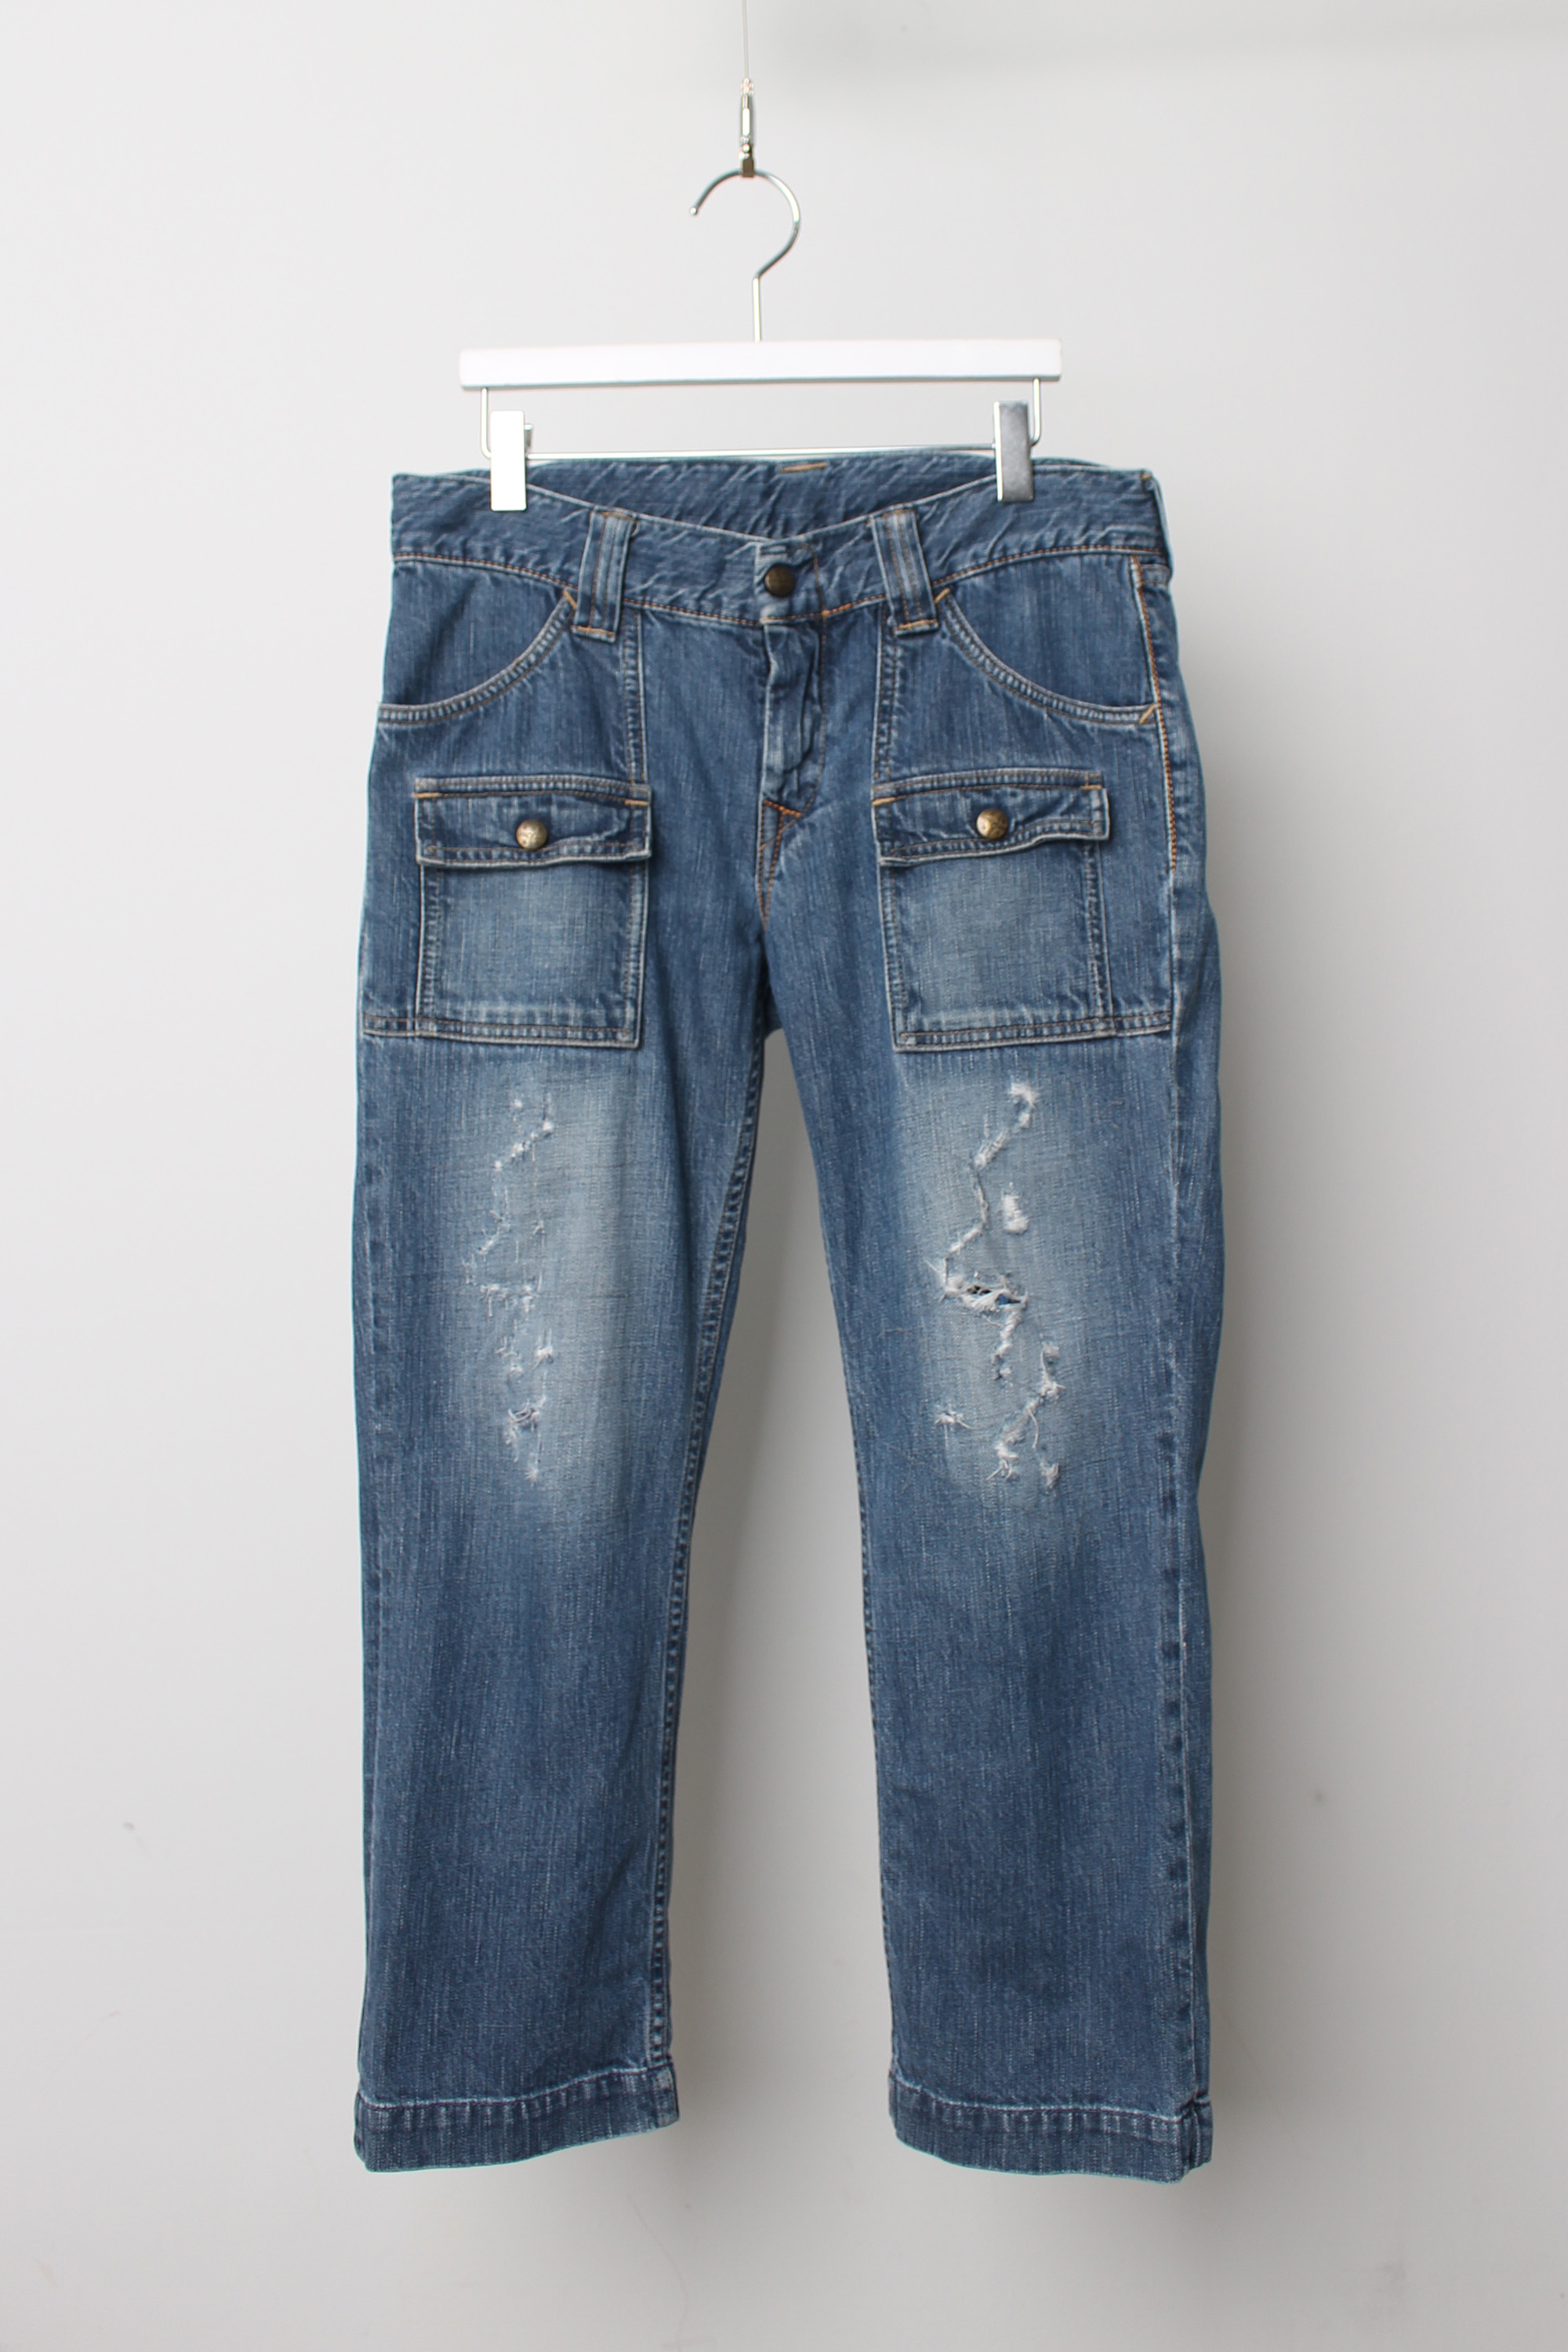 45R Washed Jean